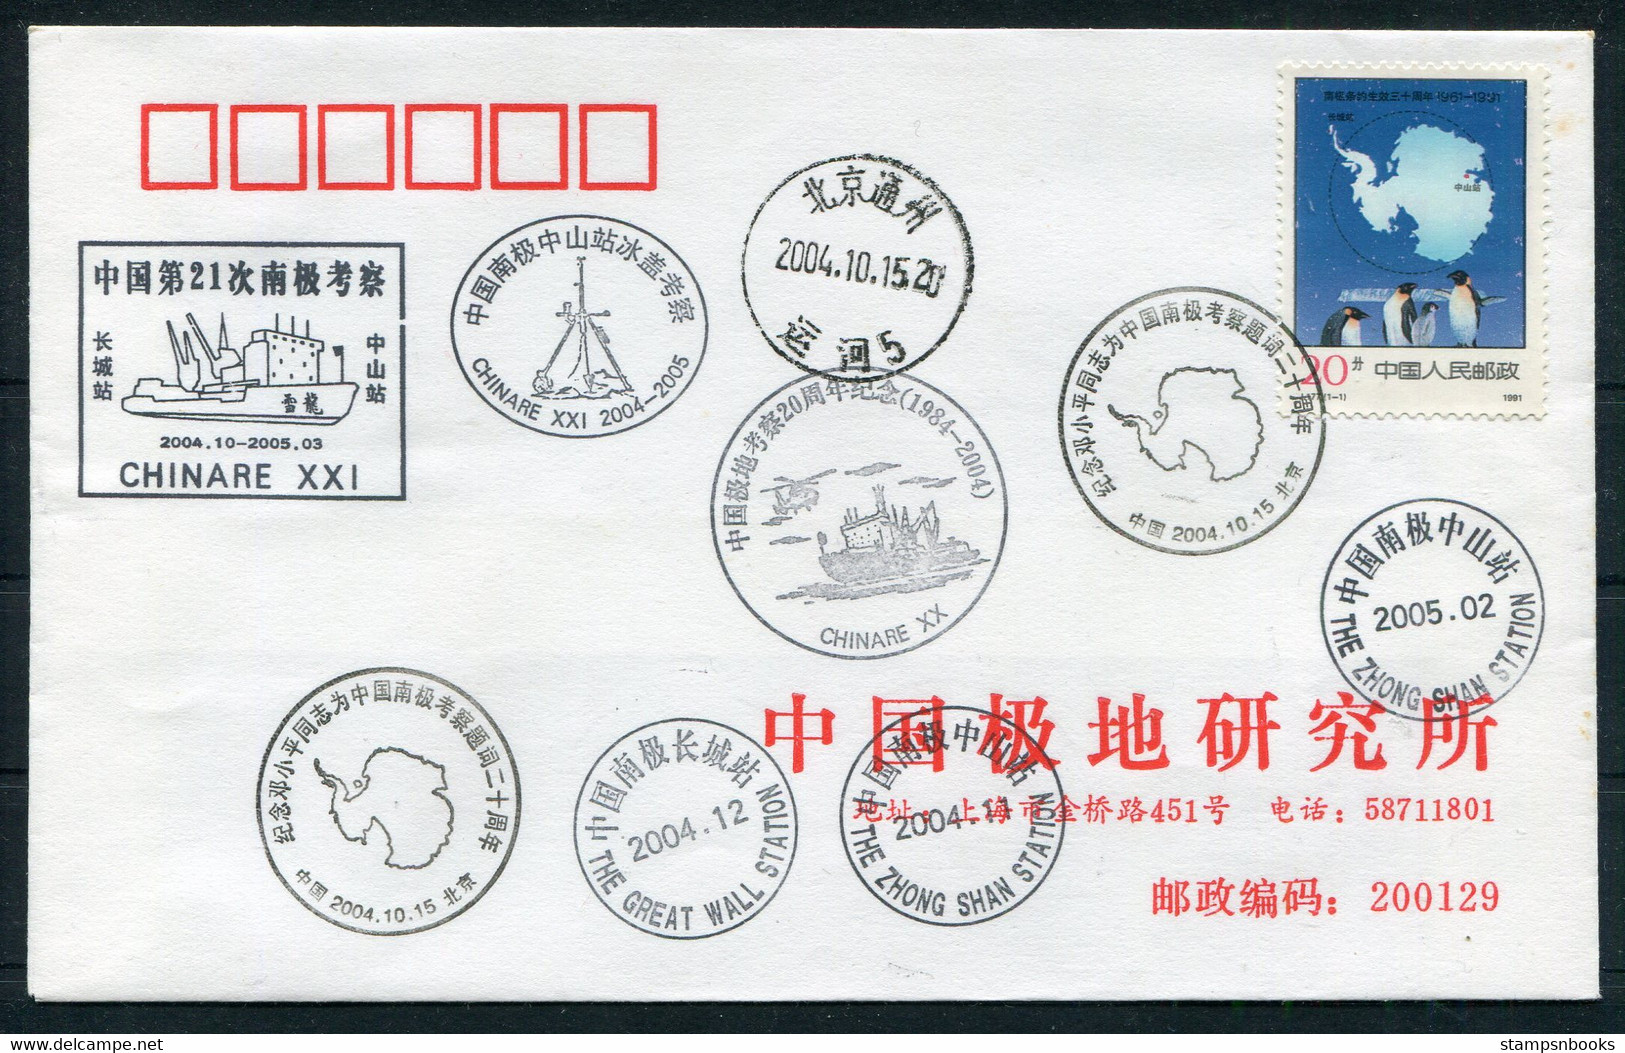 2004-5 China Antarctica CHINARE 21 Expedition, Great Wall Station + Zhong Shan Station, Penguin Cover - Lettres & Documents